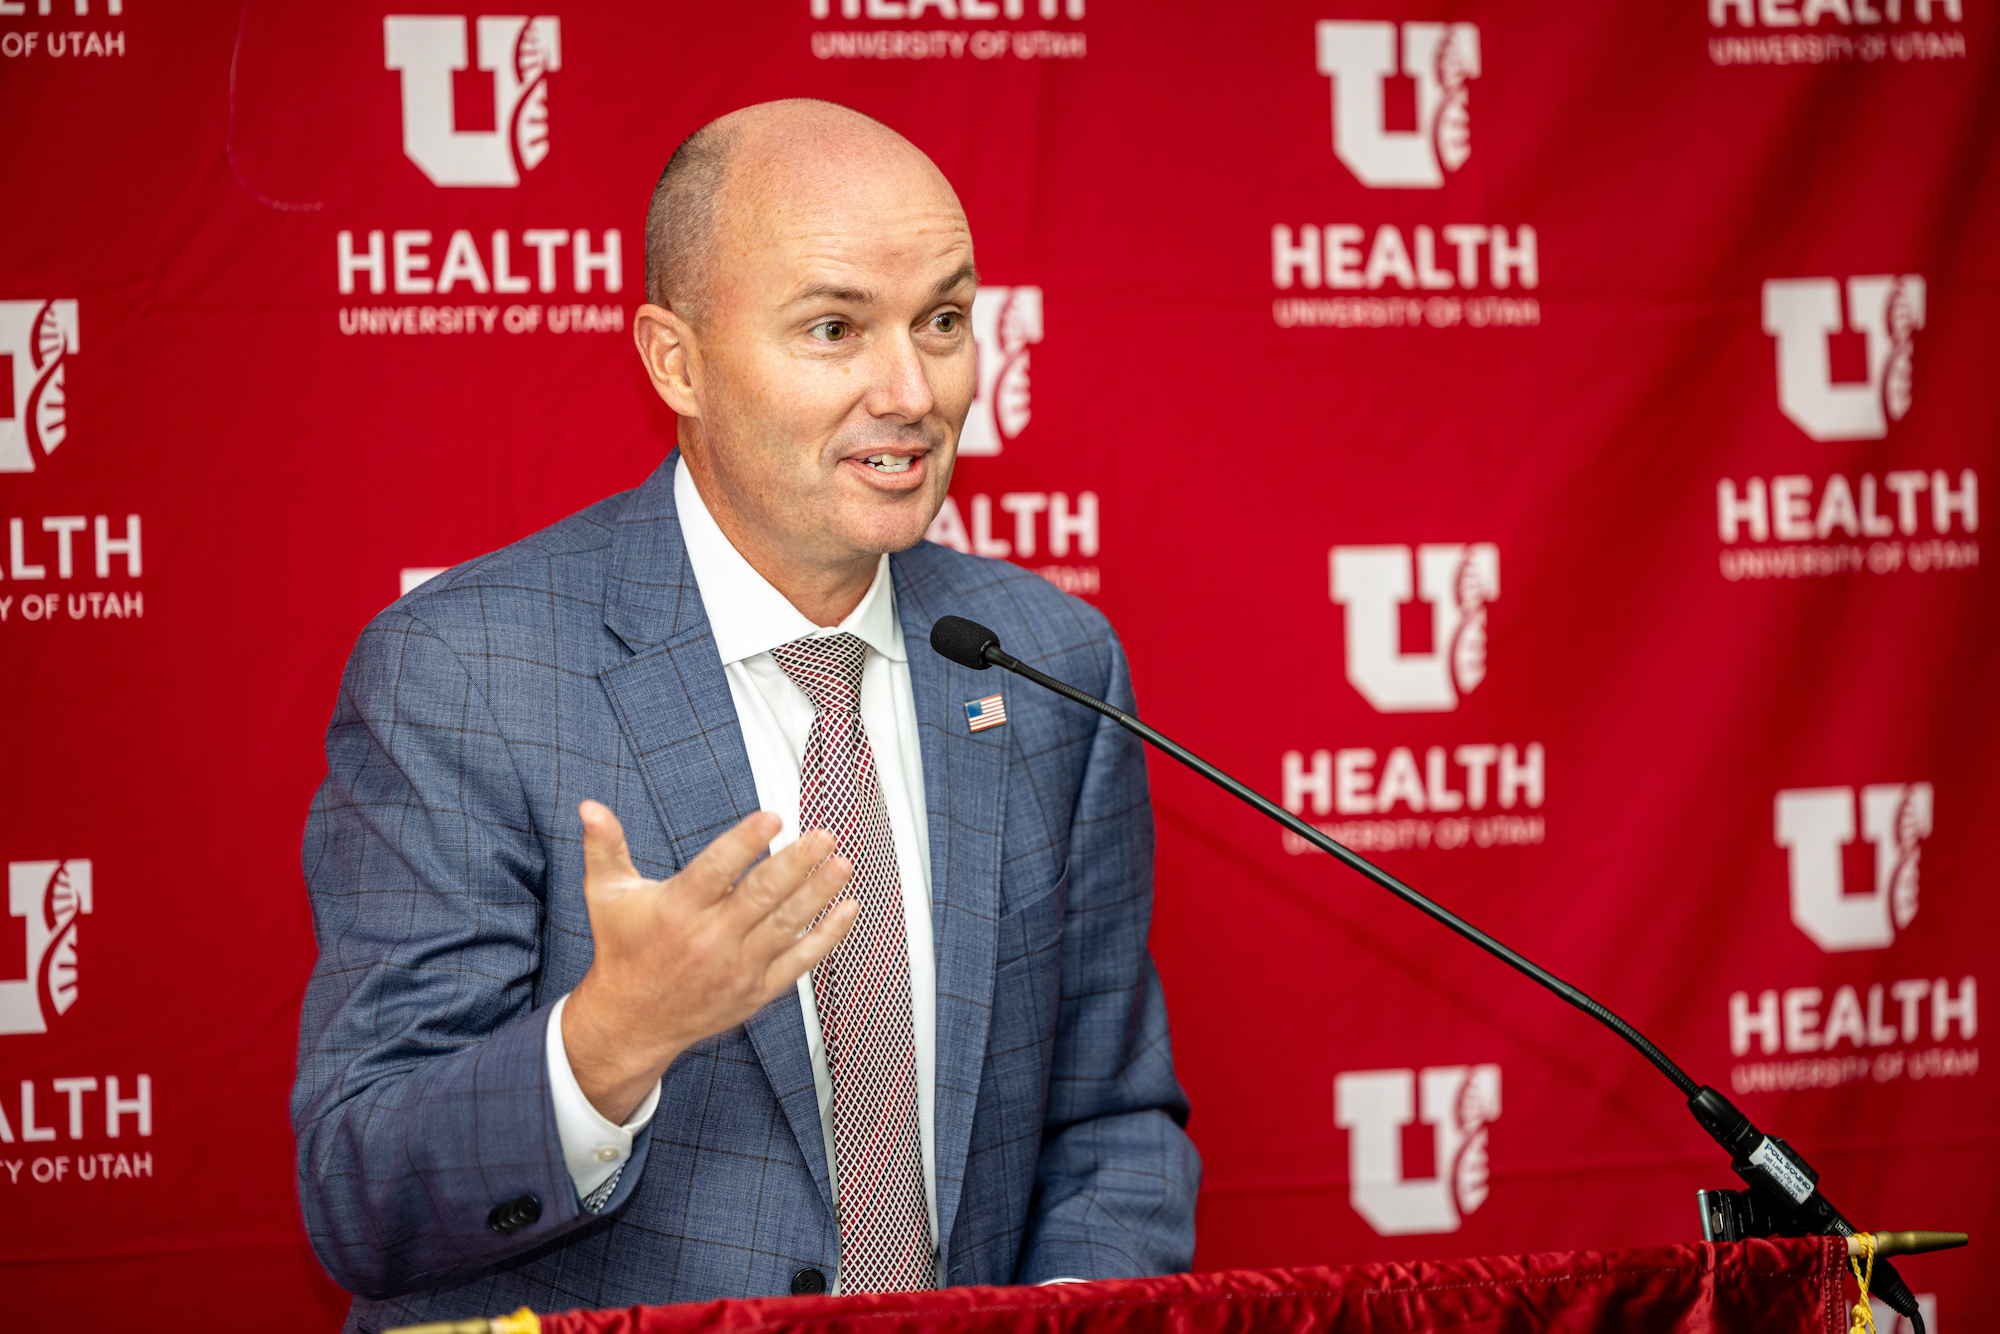 Gov. Spencer Cox joined the Population Health Center opening